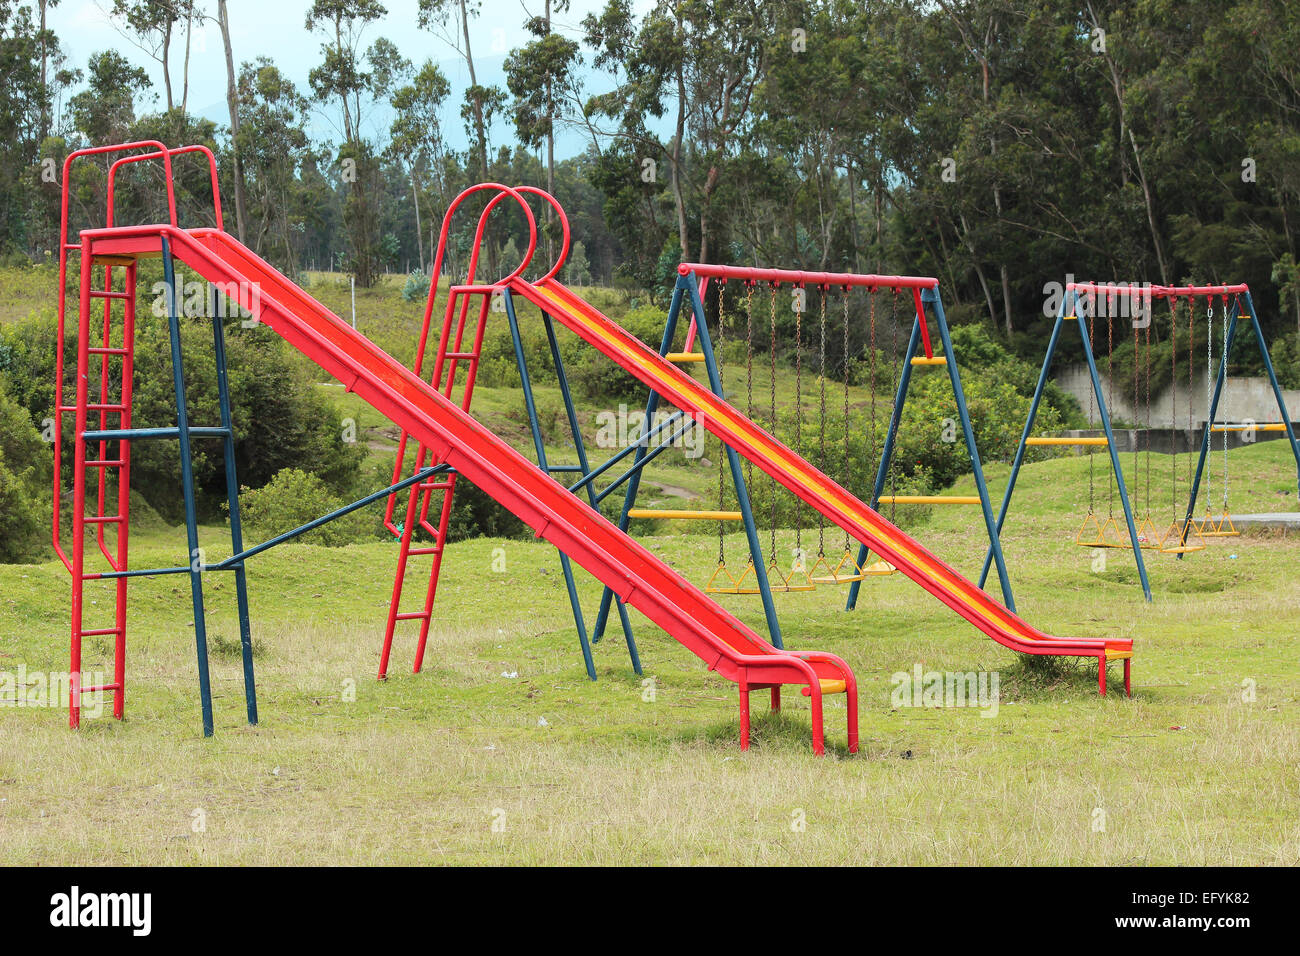 Slides And Swings In A Childrens Playground In A Park In Cotacachi